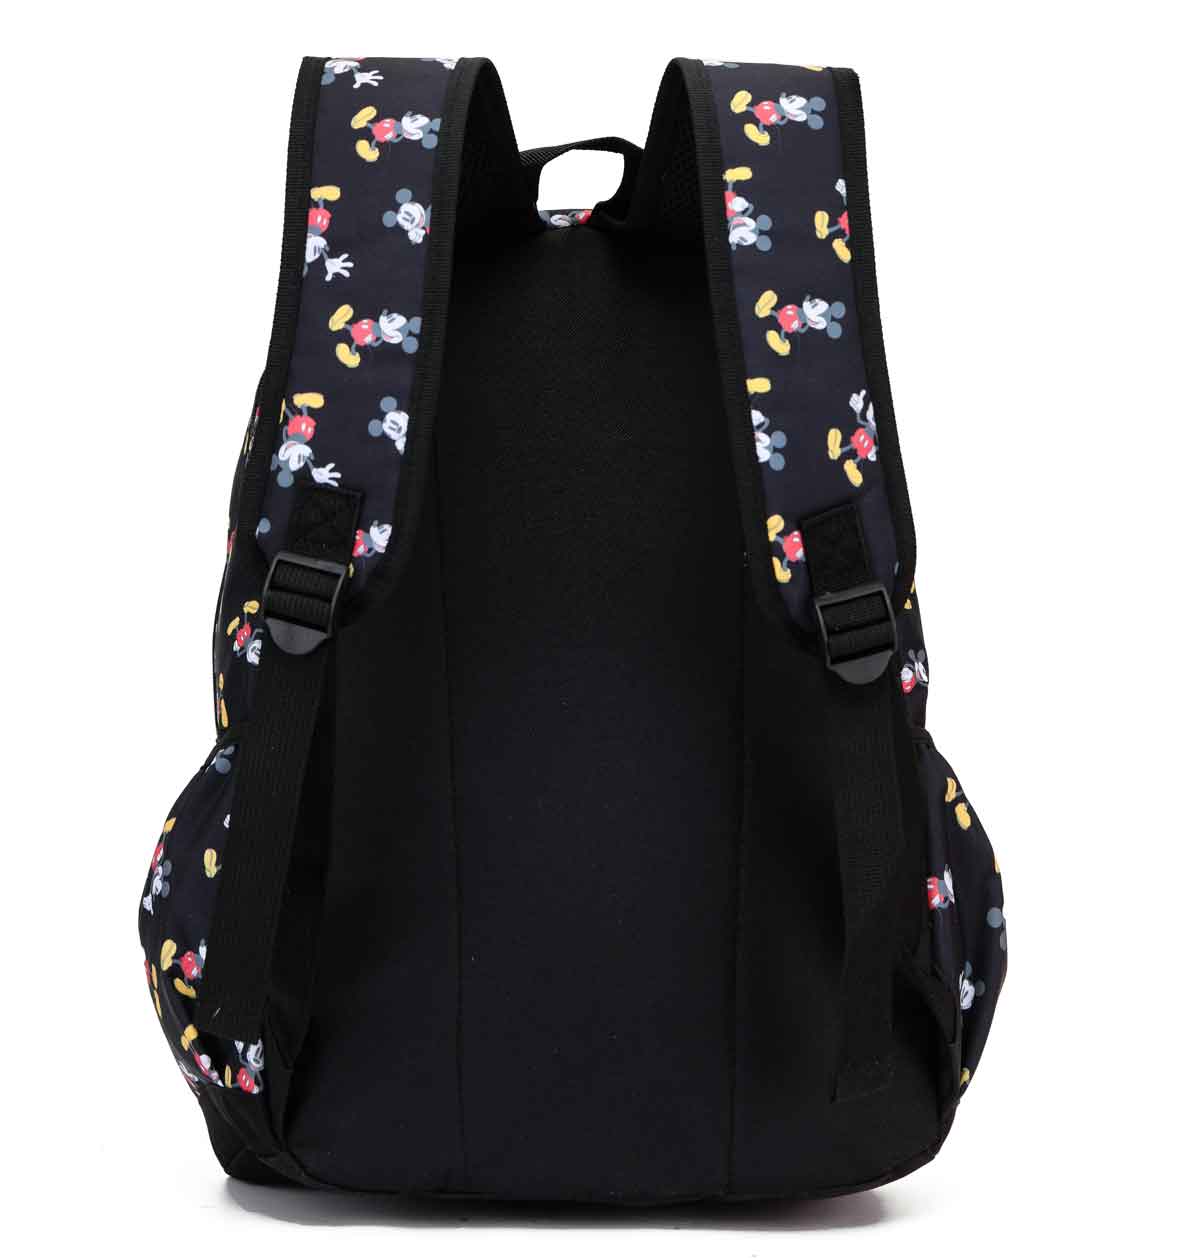 Disney Mickey Mouse Backpack for Teens and Adults Coloured